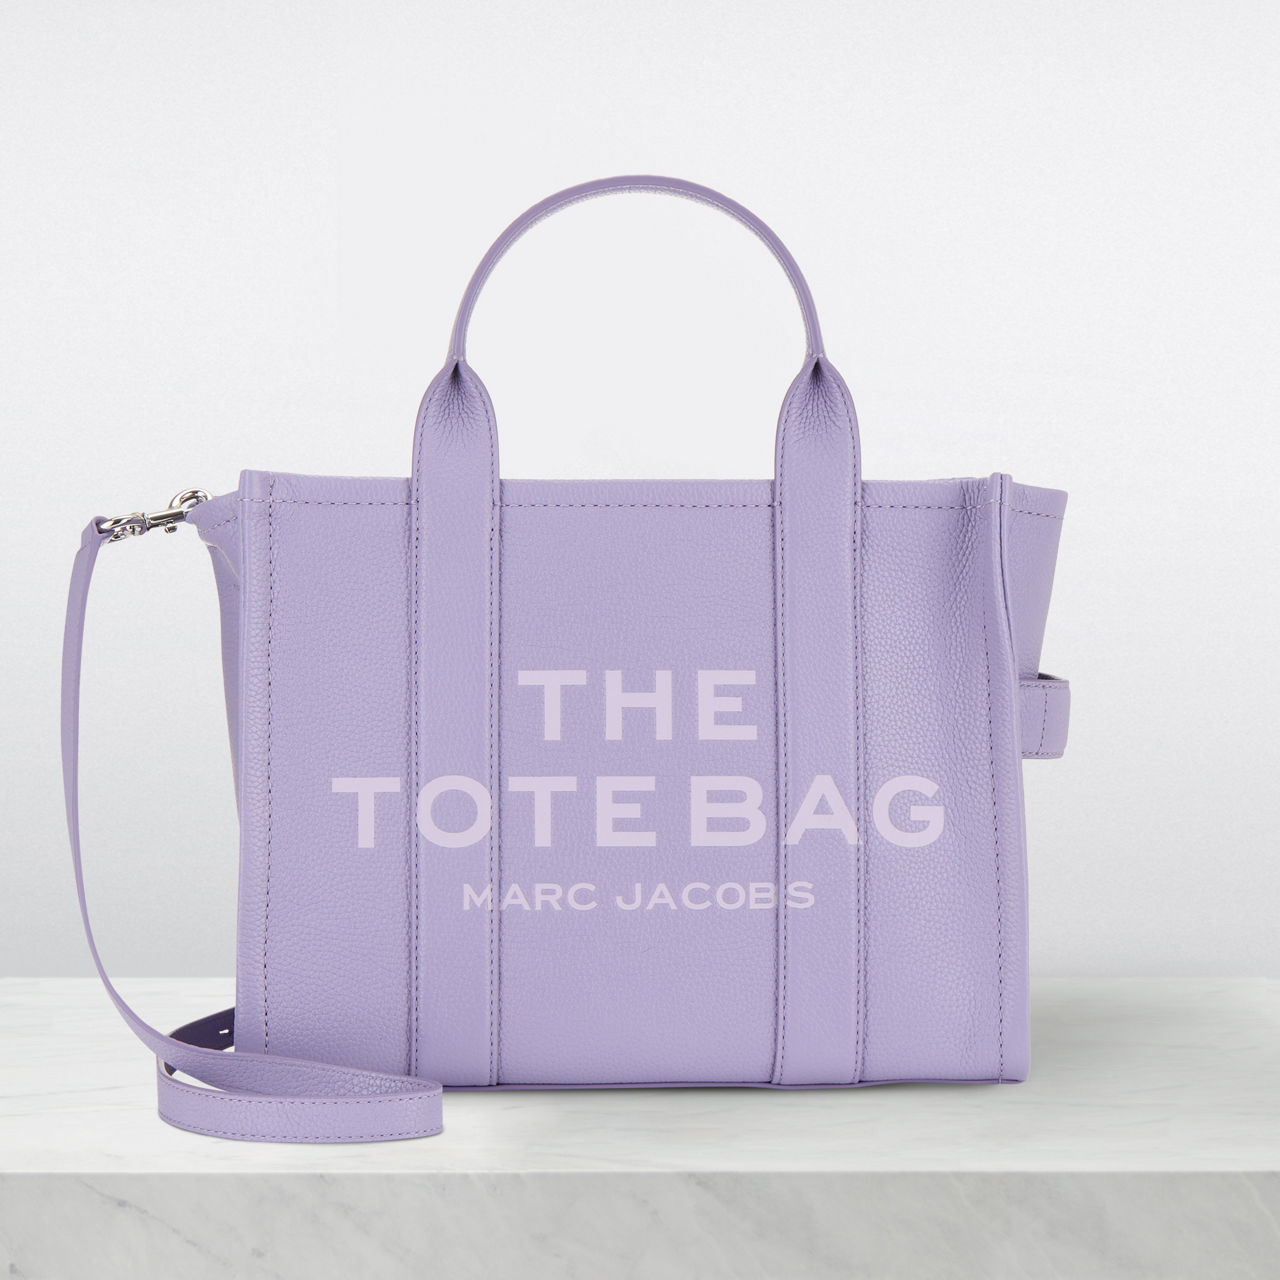 Tory pink bag - The Double Take Girls